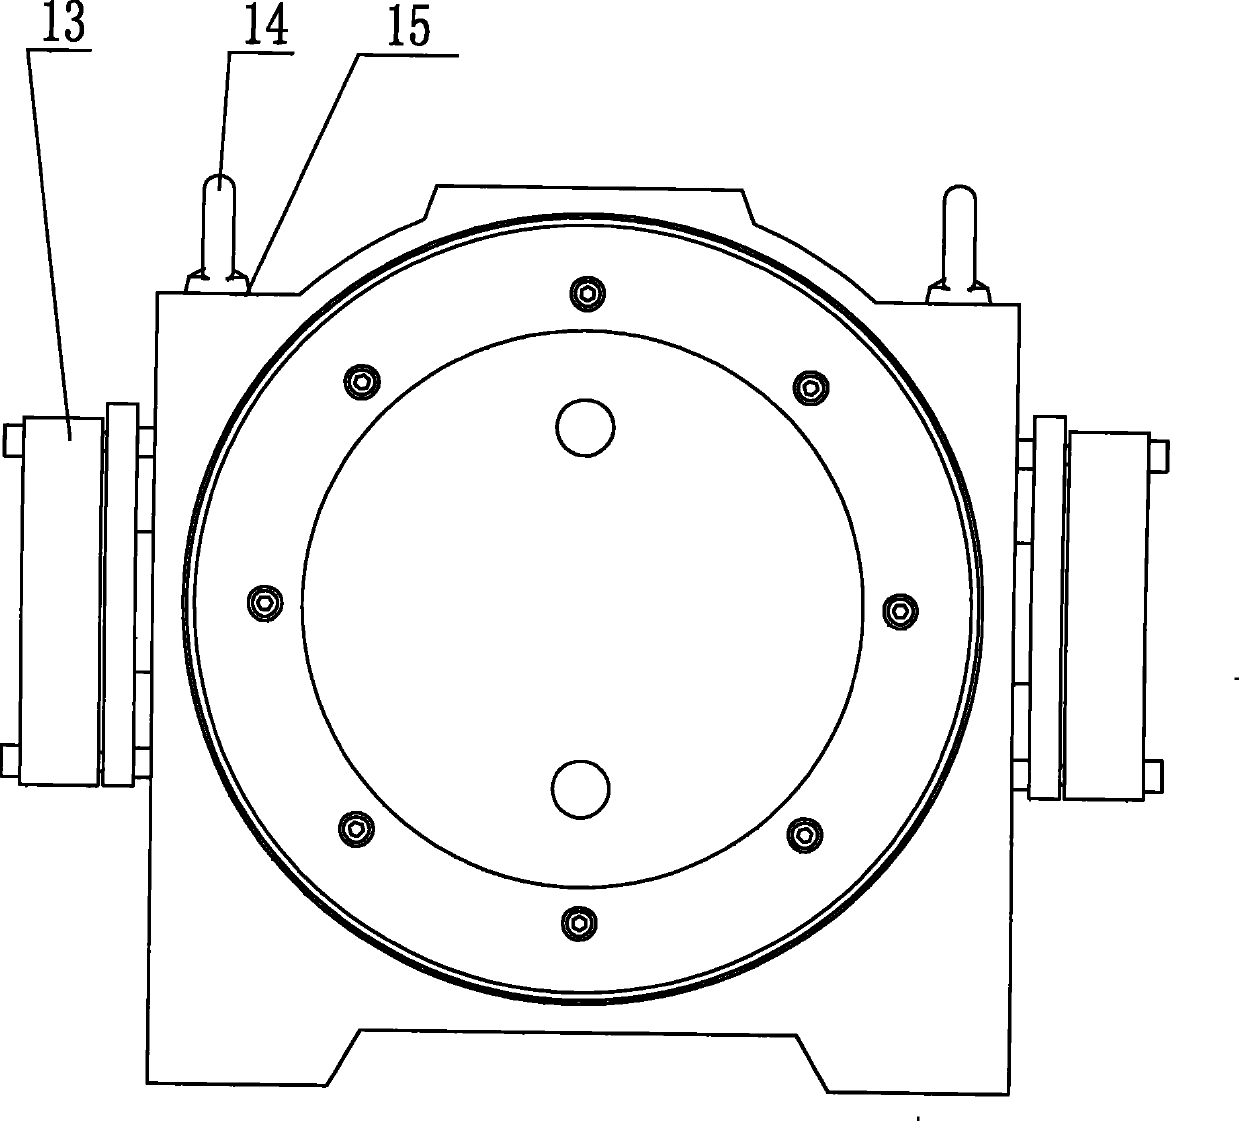 Outer rotor type permanent magnetism synchronization gear wheel free traction machine